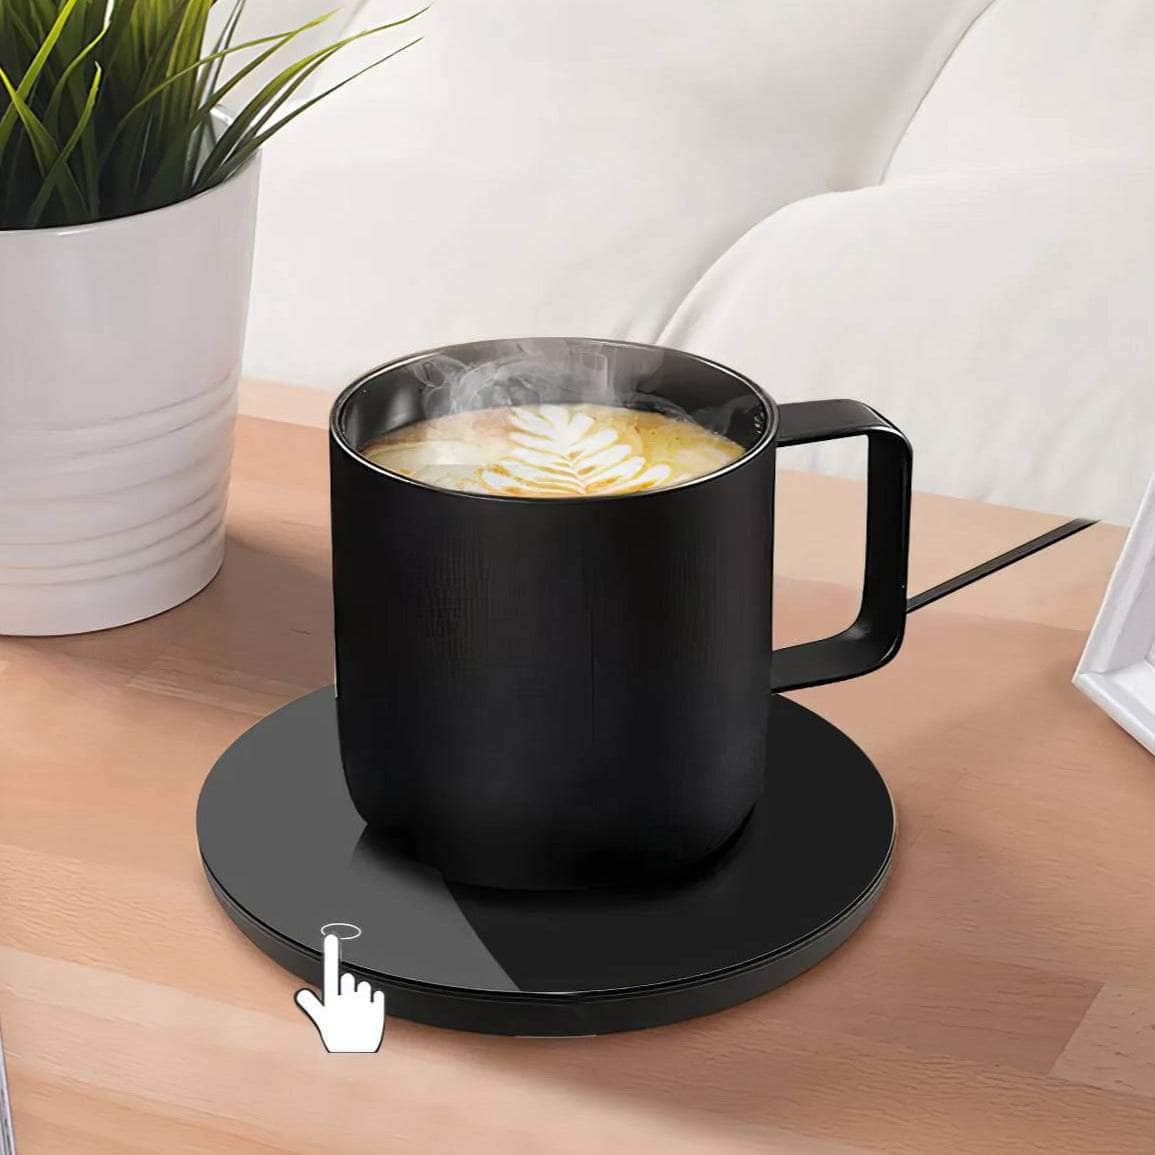 Coffee Cup Heater - USB Heating Pad, Electric Milk Tea Warmer, Thermostatic Coasters for Home Office Desk